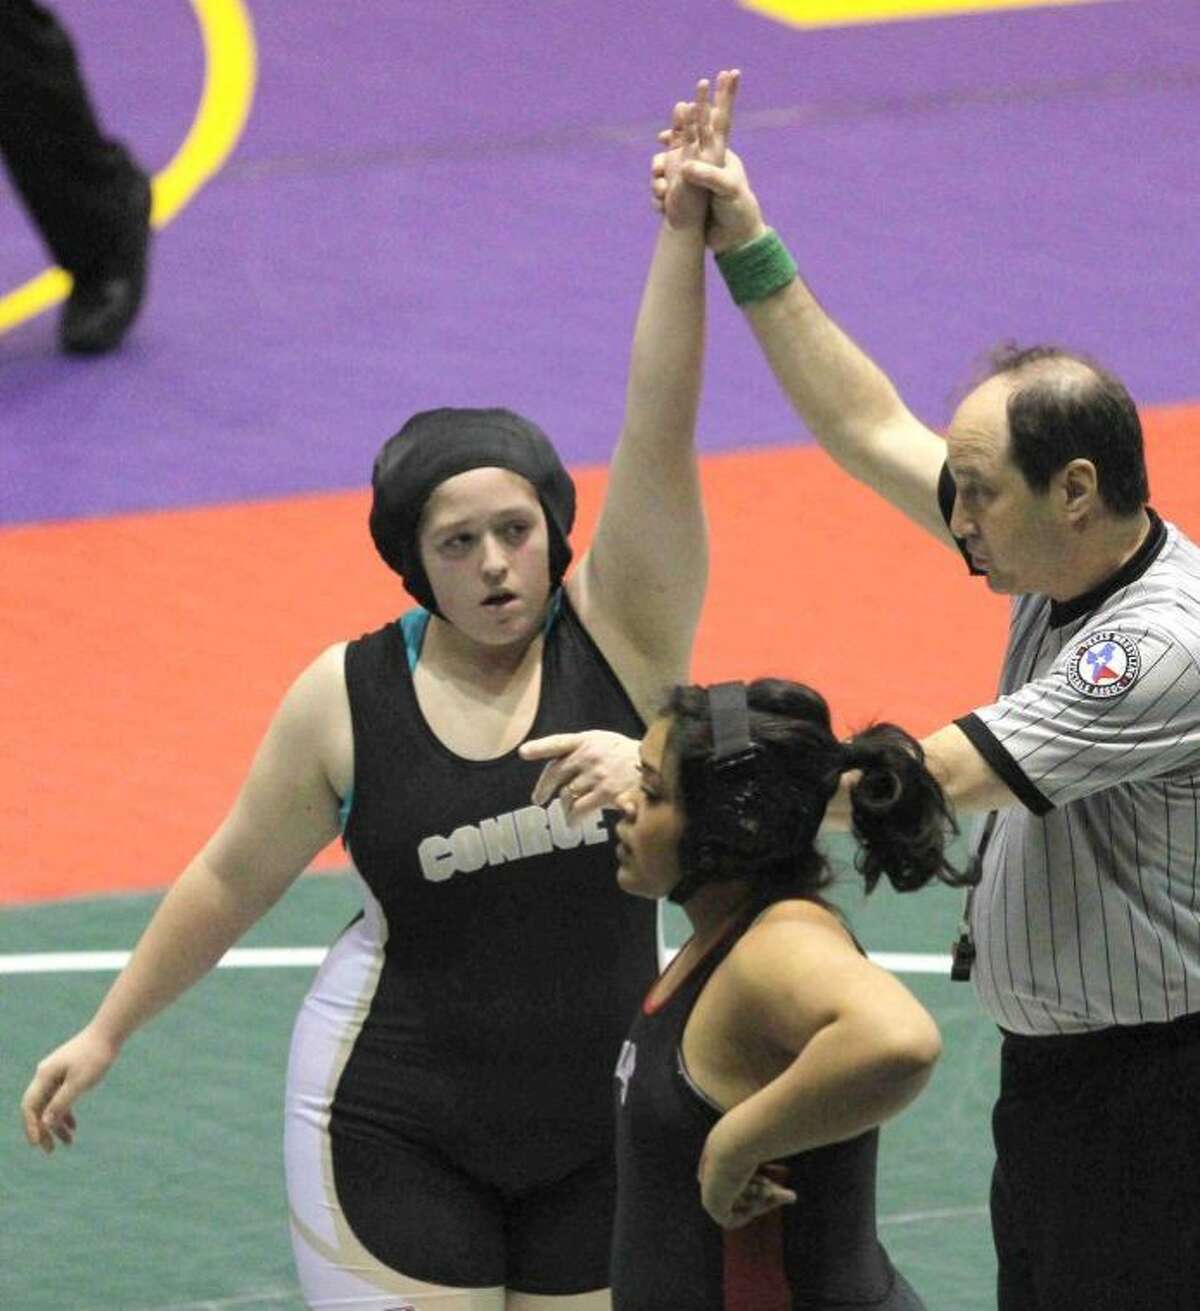 Conroe's Rebecka Winton defeated Trinity's Vanely Chairez during a match at the UIL State Wrestling Championship in Garland Friday. To view or purchase this photo and others like it, visit HCNpics.com.